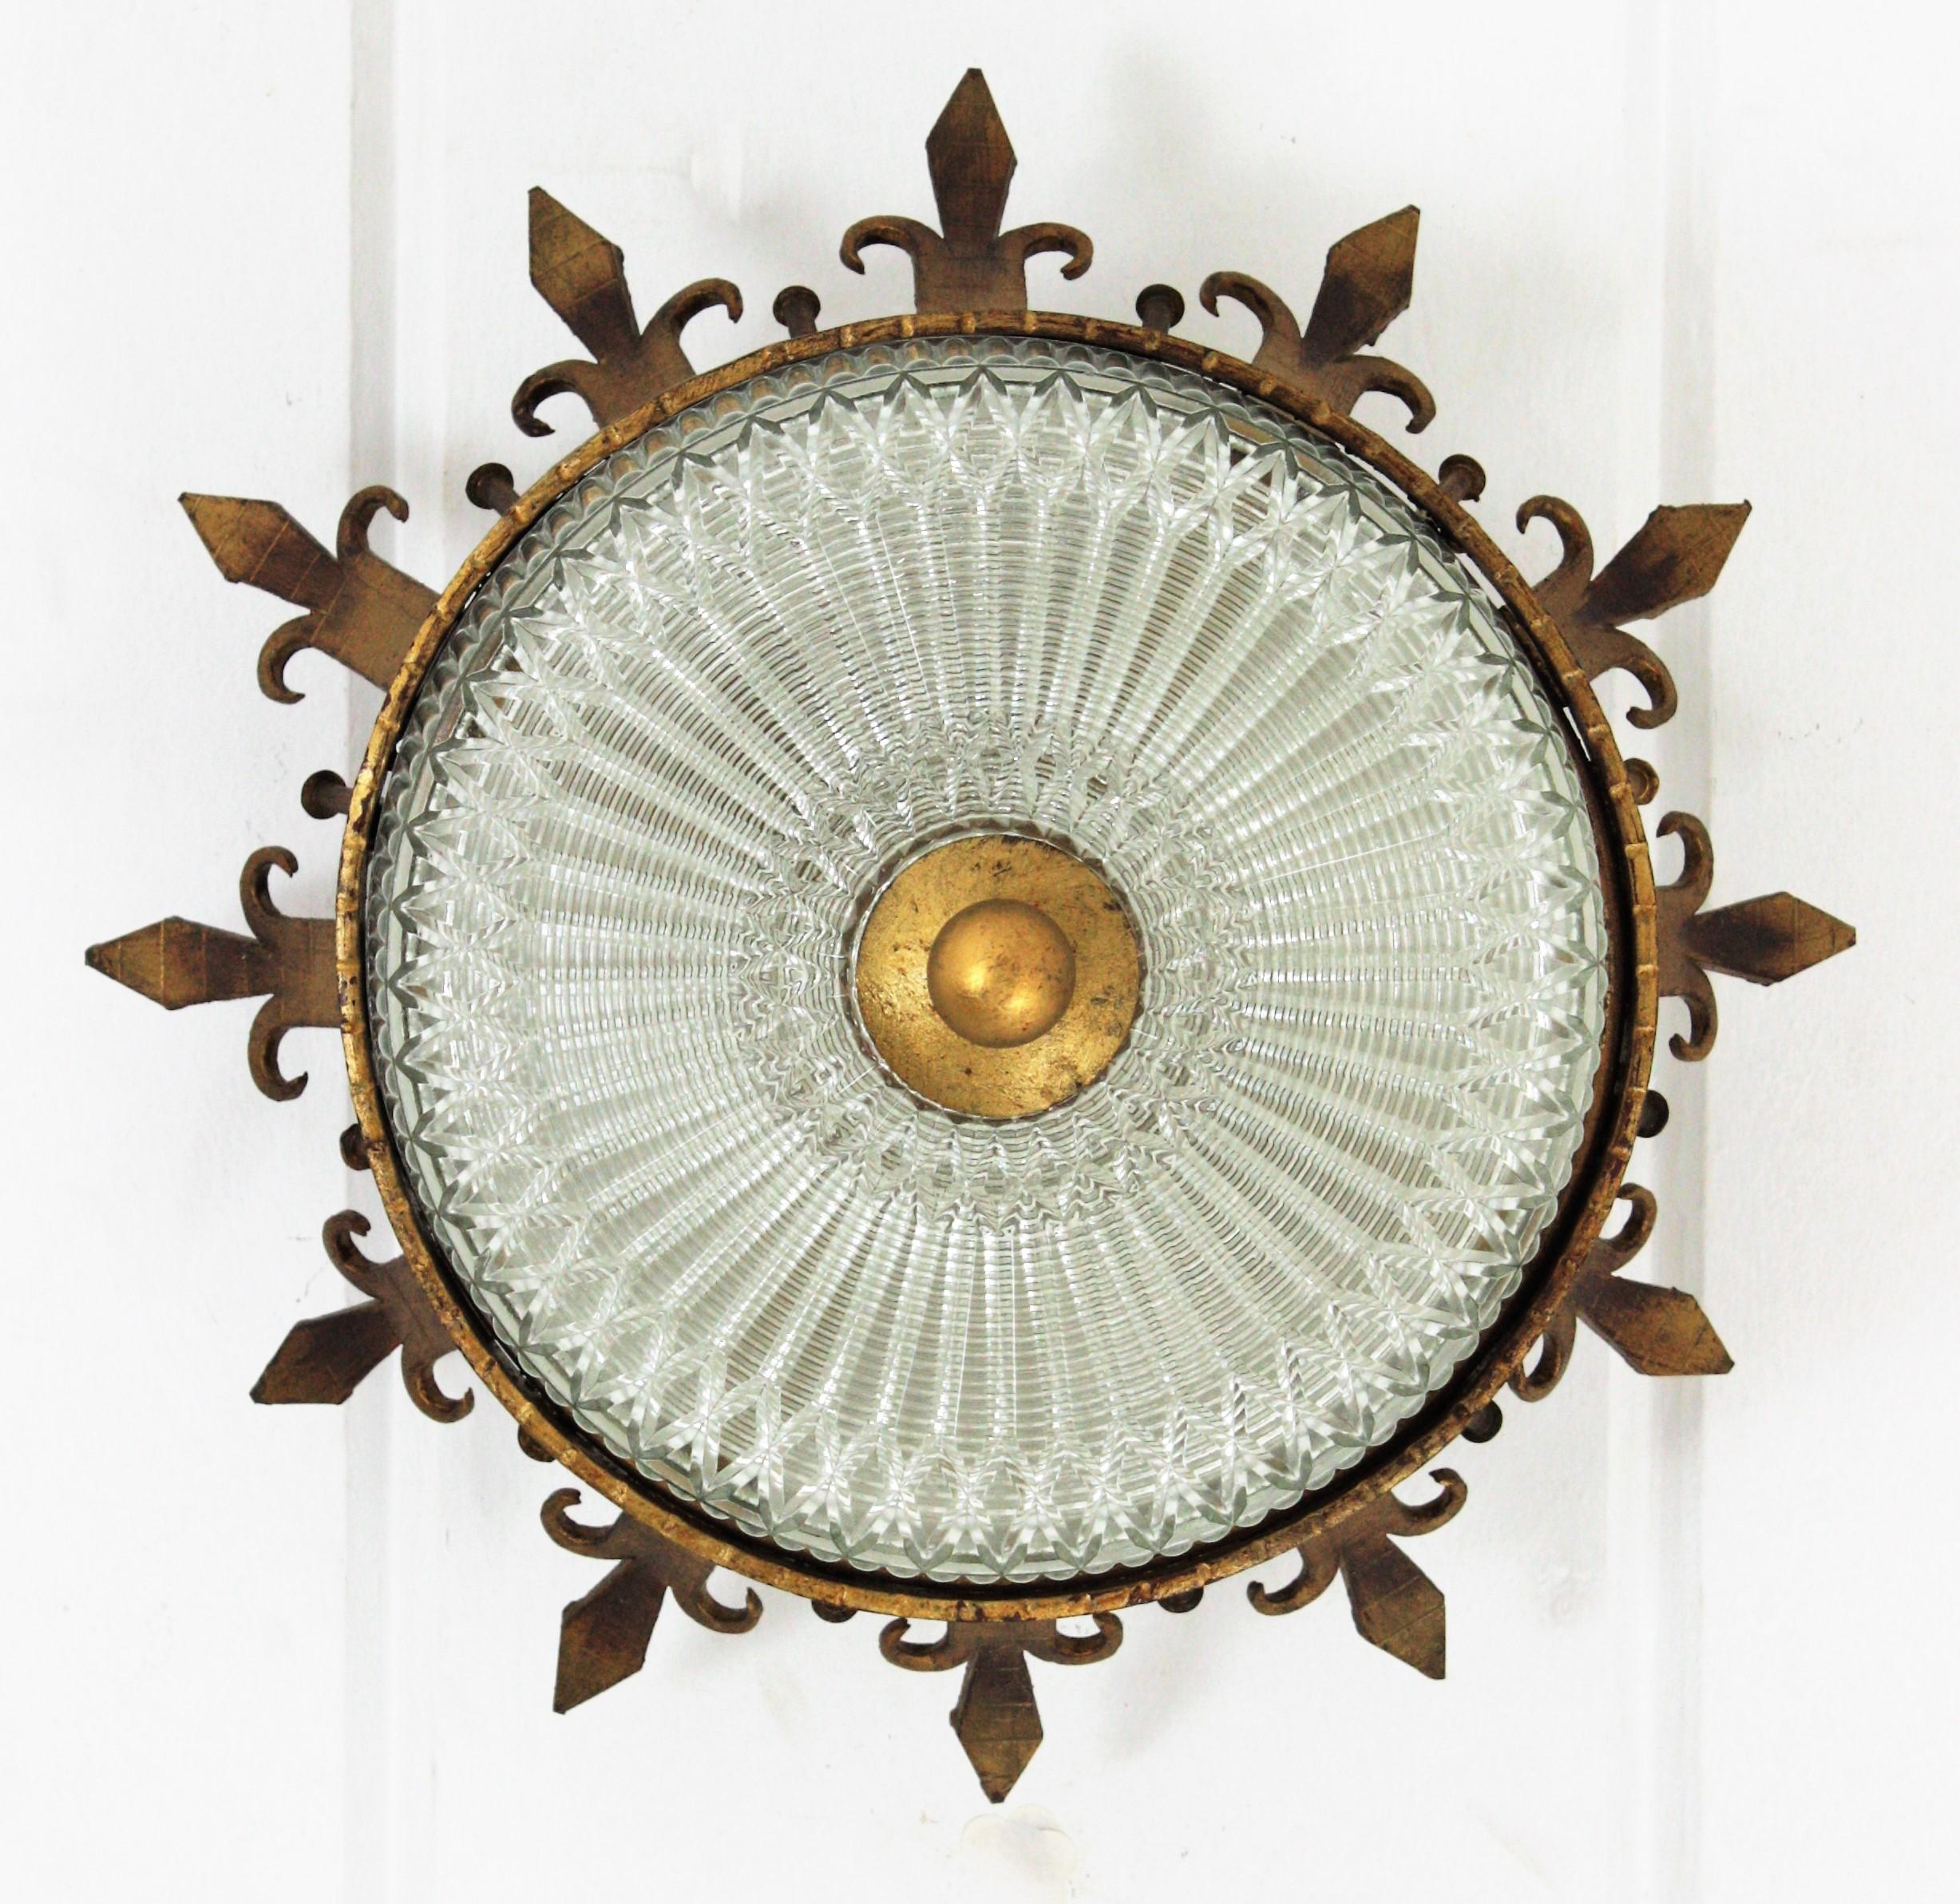 An sculptural hand hammered iron and glass ceiling light fixture with neoclassical and gothic revival accents. Spain, 1930-1940s.
This hand forged and gilded iron crown sunburst light fixture has a fluted glass shade with a gilt iron ball finial.